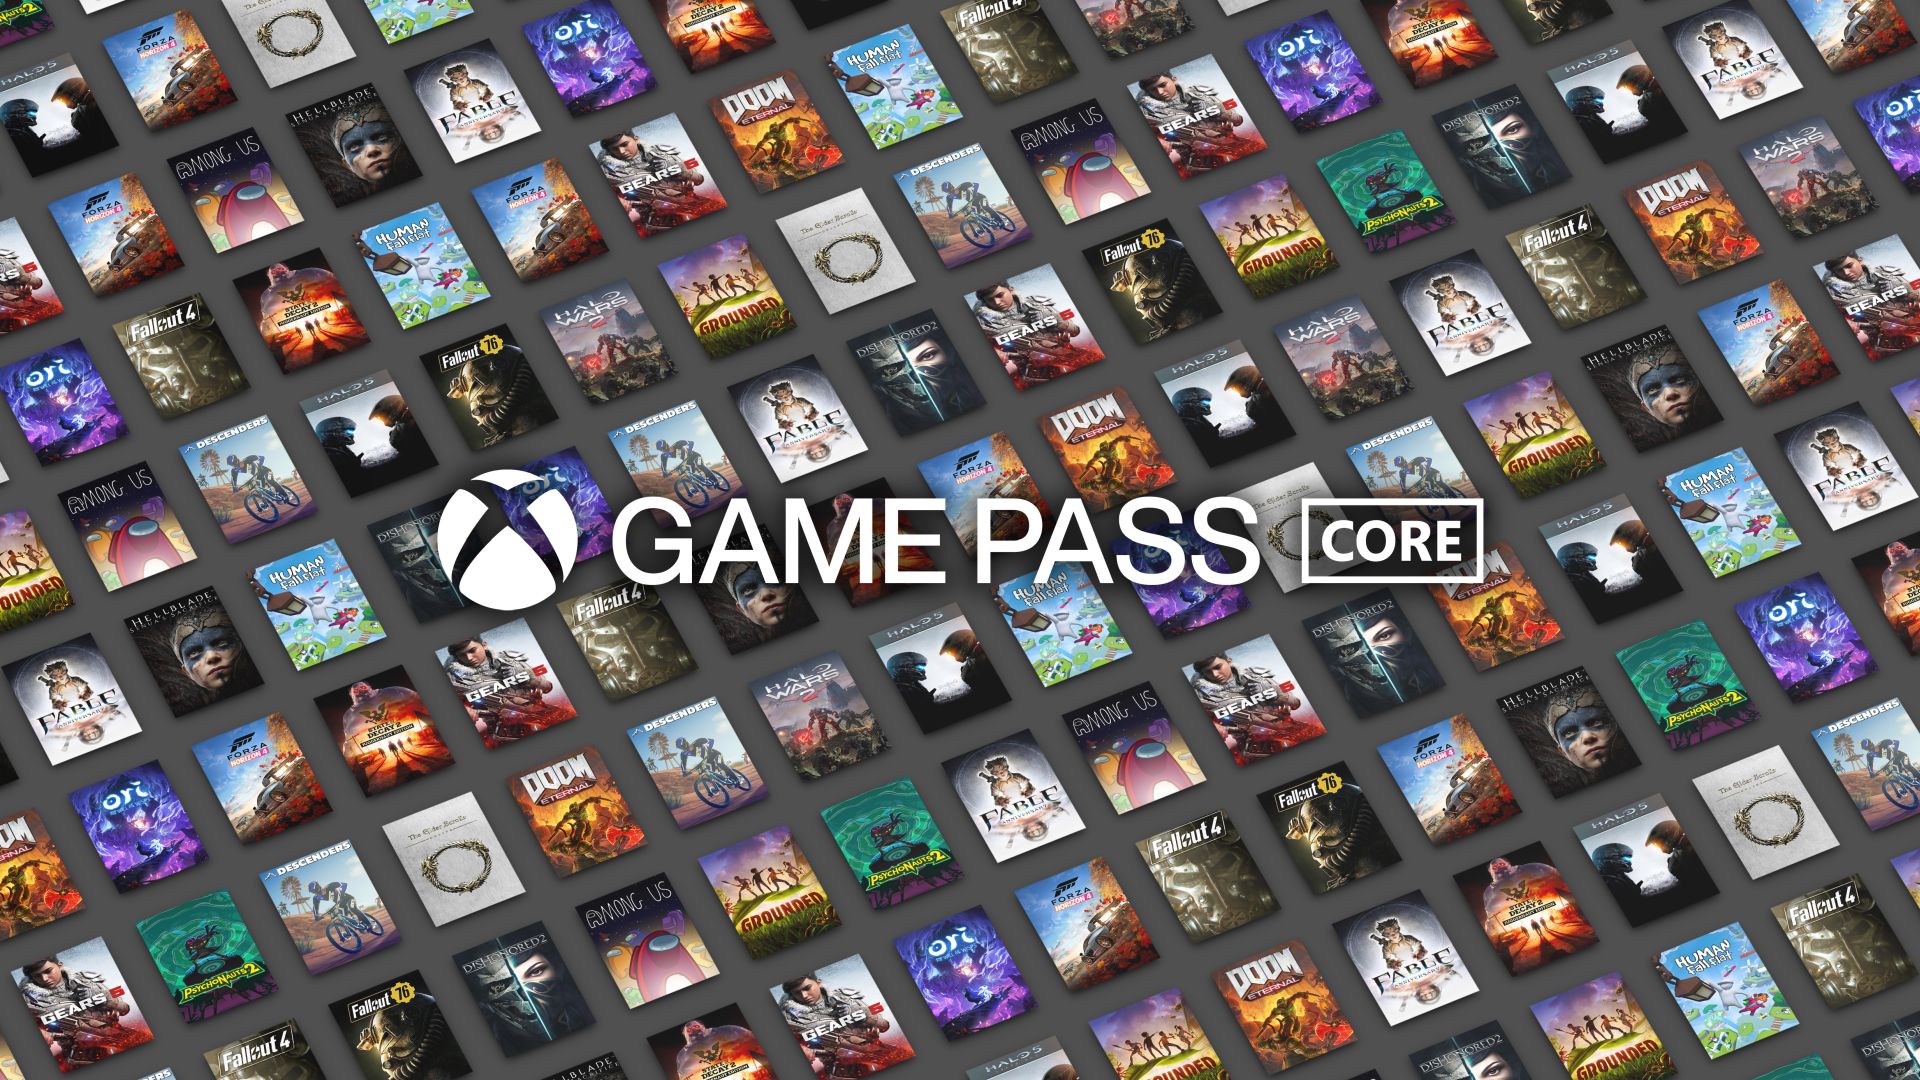 Gaming on a PC? You Really Need to Get Xbox Game Pass Ultimate